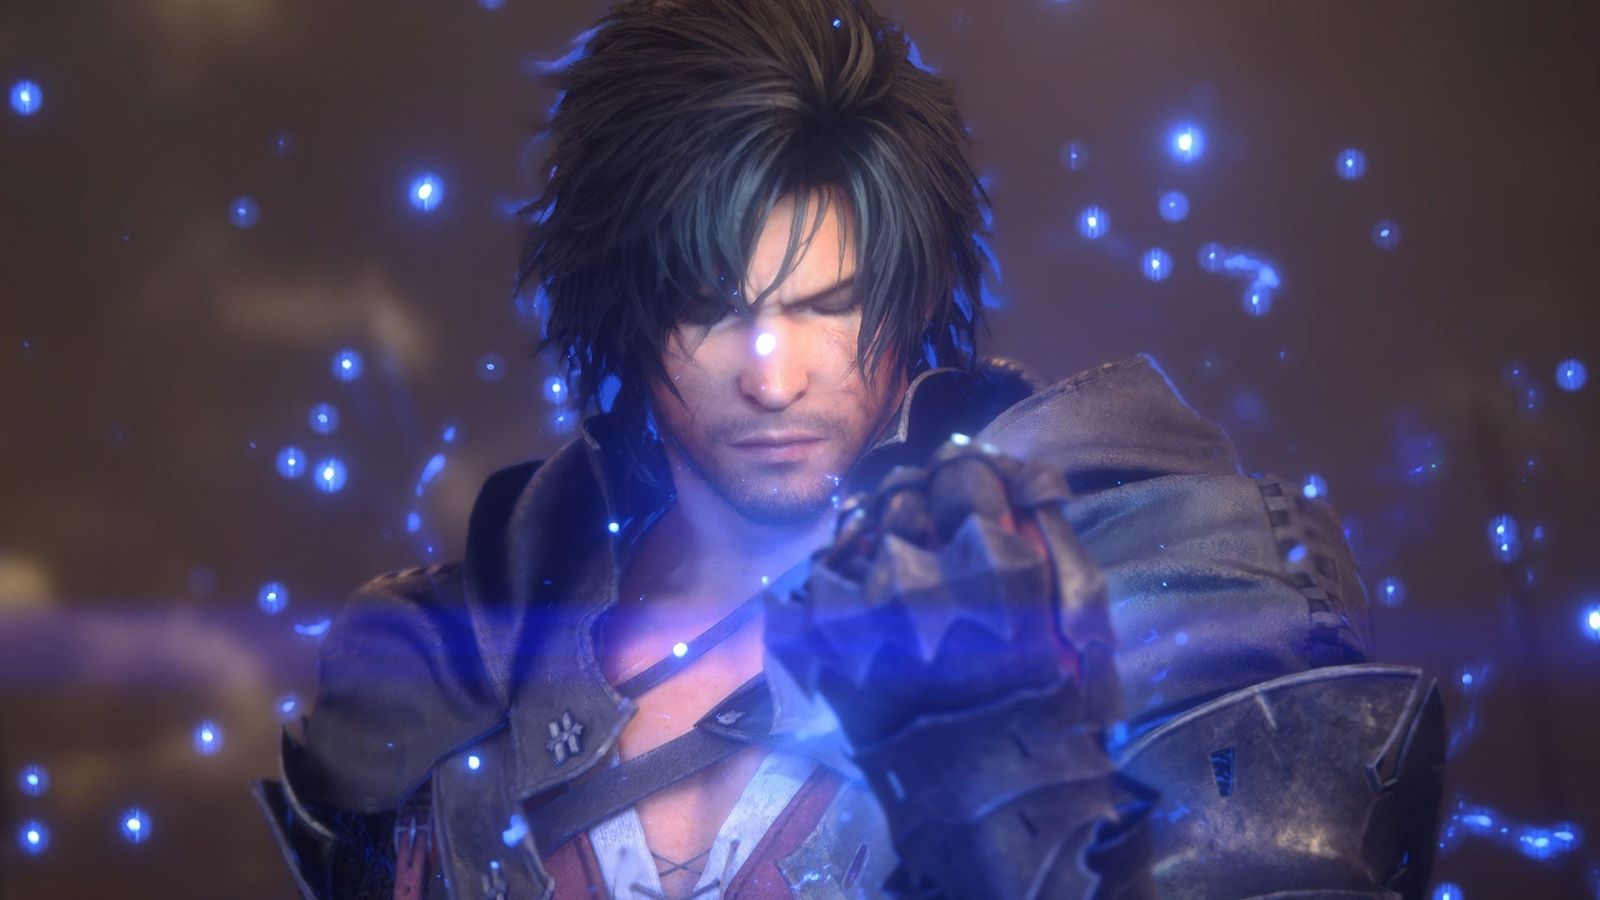 final fantasy 16 sales are extremely strong despite exclusivity